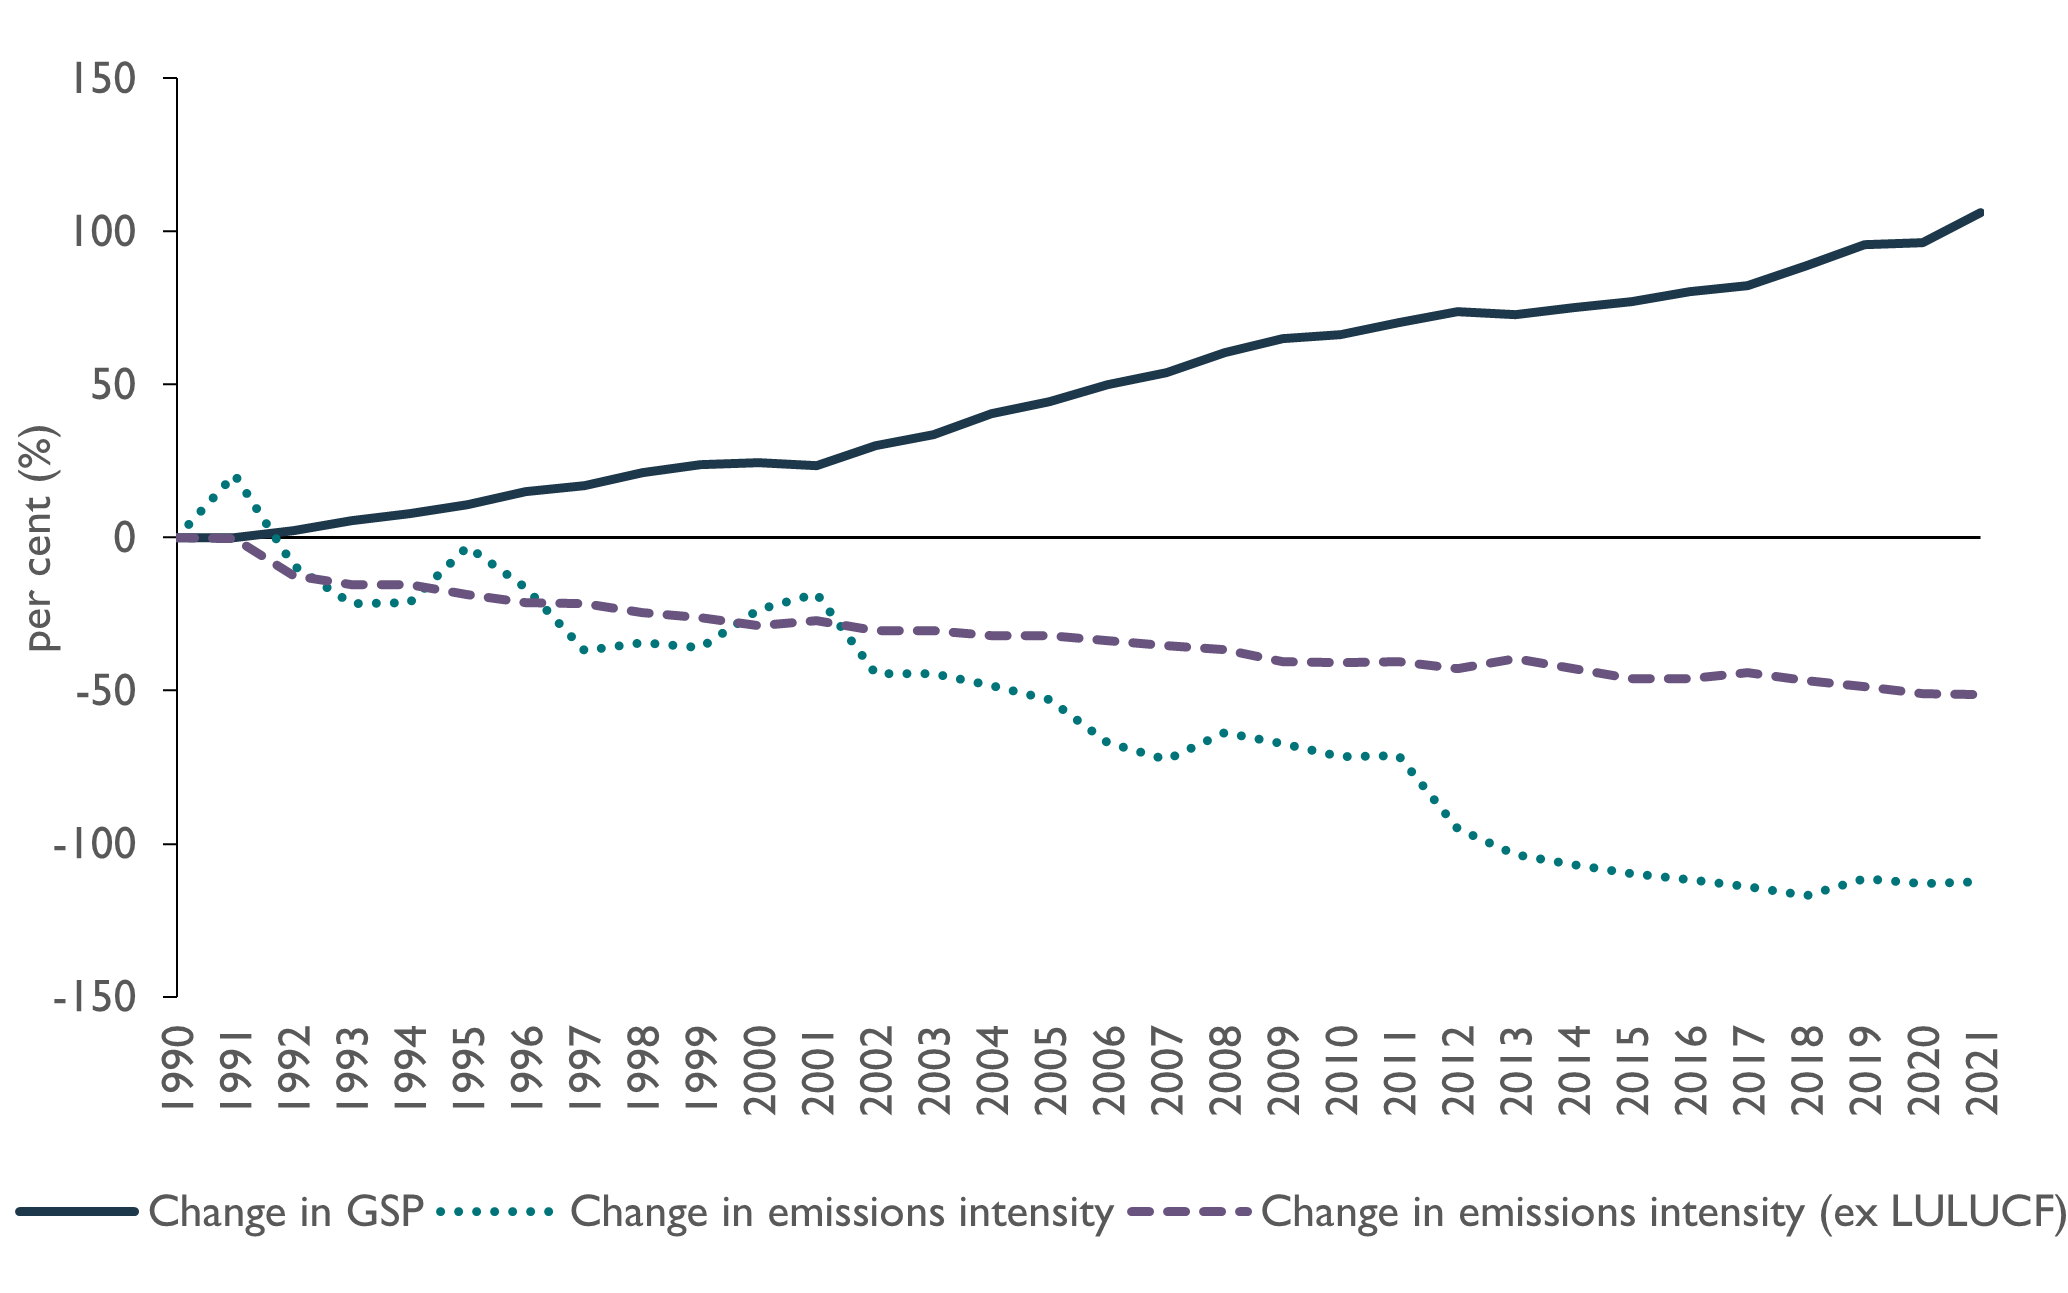 This figure is a line chart showing the percentage change in Tasmania's real GSP and emissions intensity, with and without the LULUCF sector, from 1990 to 2021 relative to the 1990 baseline. It shows Tasmania's real GSP steadily increasing between 1990 and 2021, to show a total change of 106.2 per cent. When LULUCF is included, it shows a downward trend in the emissions intensity of the Tasmanian economy, to a figure of minus 112.35 per cent. When LULUCF is excluded, it shows a largely constant downward trend since 1991, with the emissions intensity of the Tasmanian economy having declined by 51.3 per cent in 2021.